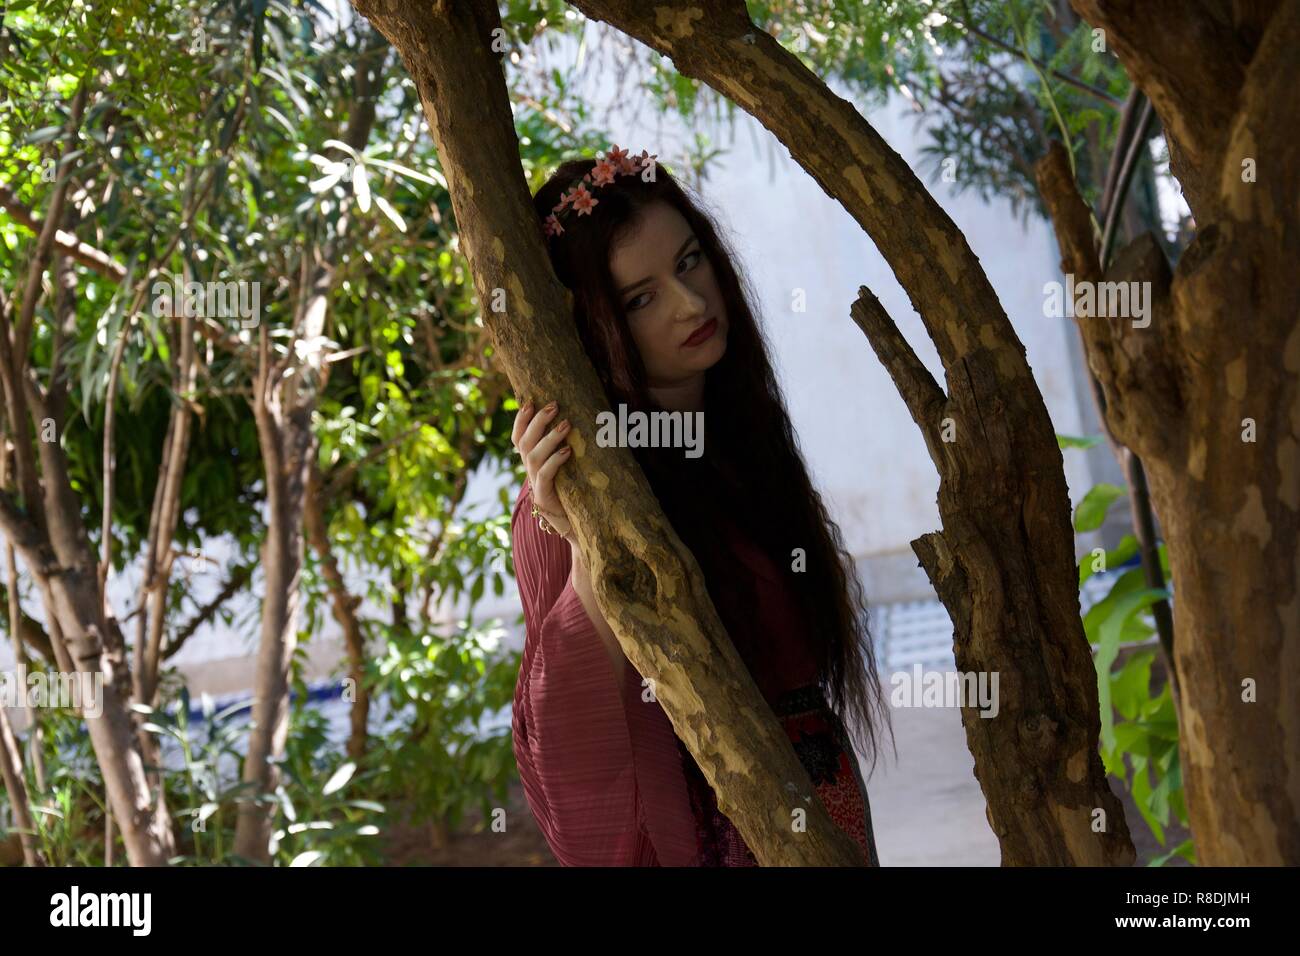 A hippie girl with flowers in her long hair leans against a tree, sulking and looking petulant and fed up Stock Photo